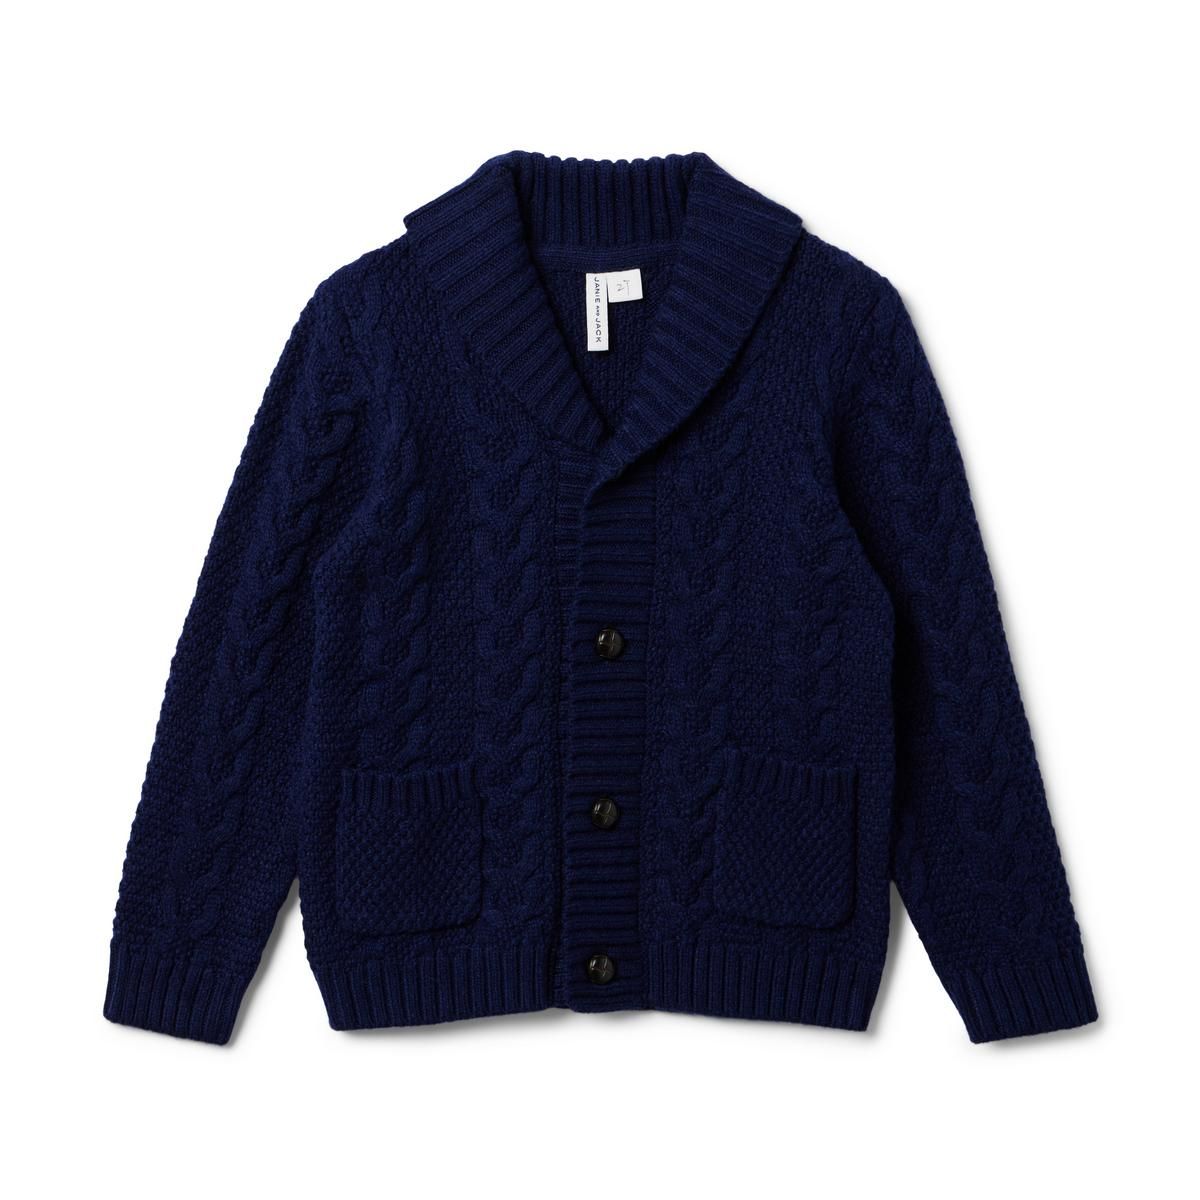 The Cable Shawl Collar Cardigan | Janie and Jack